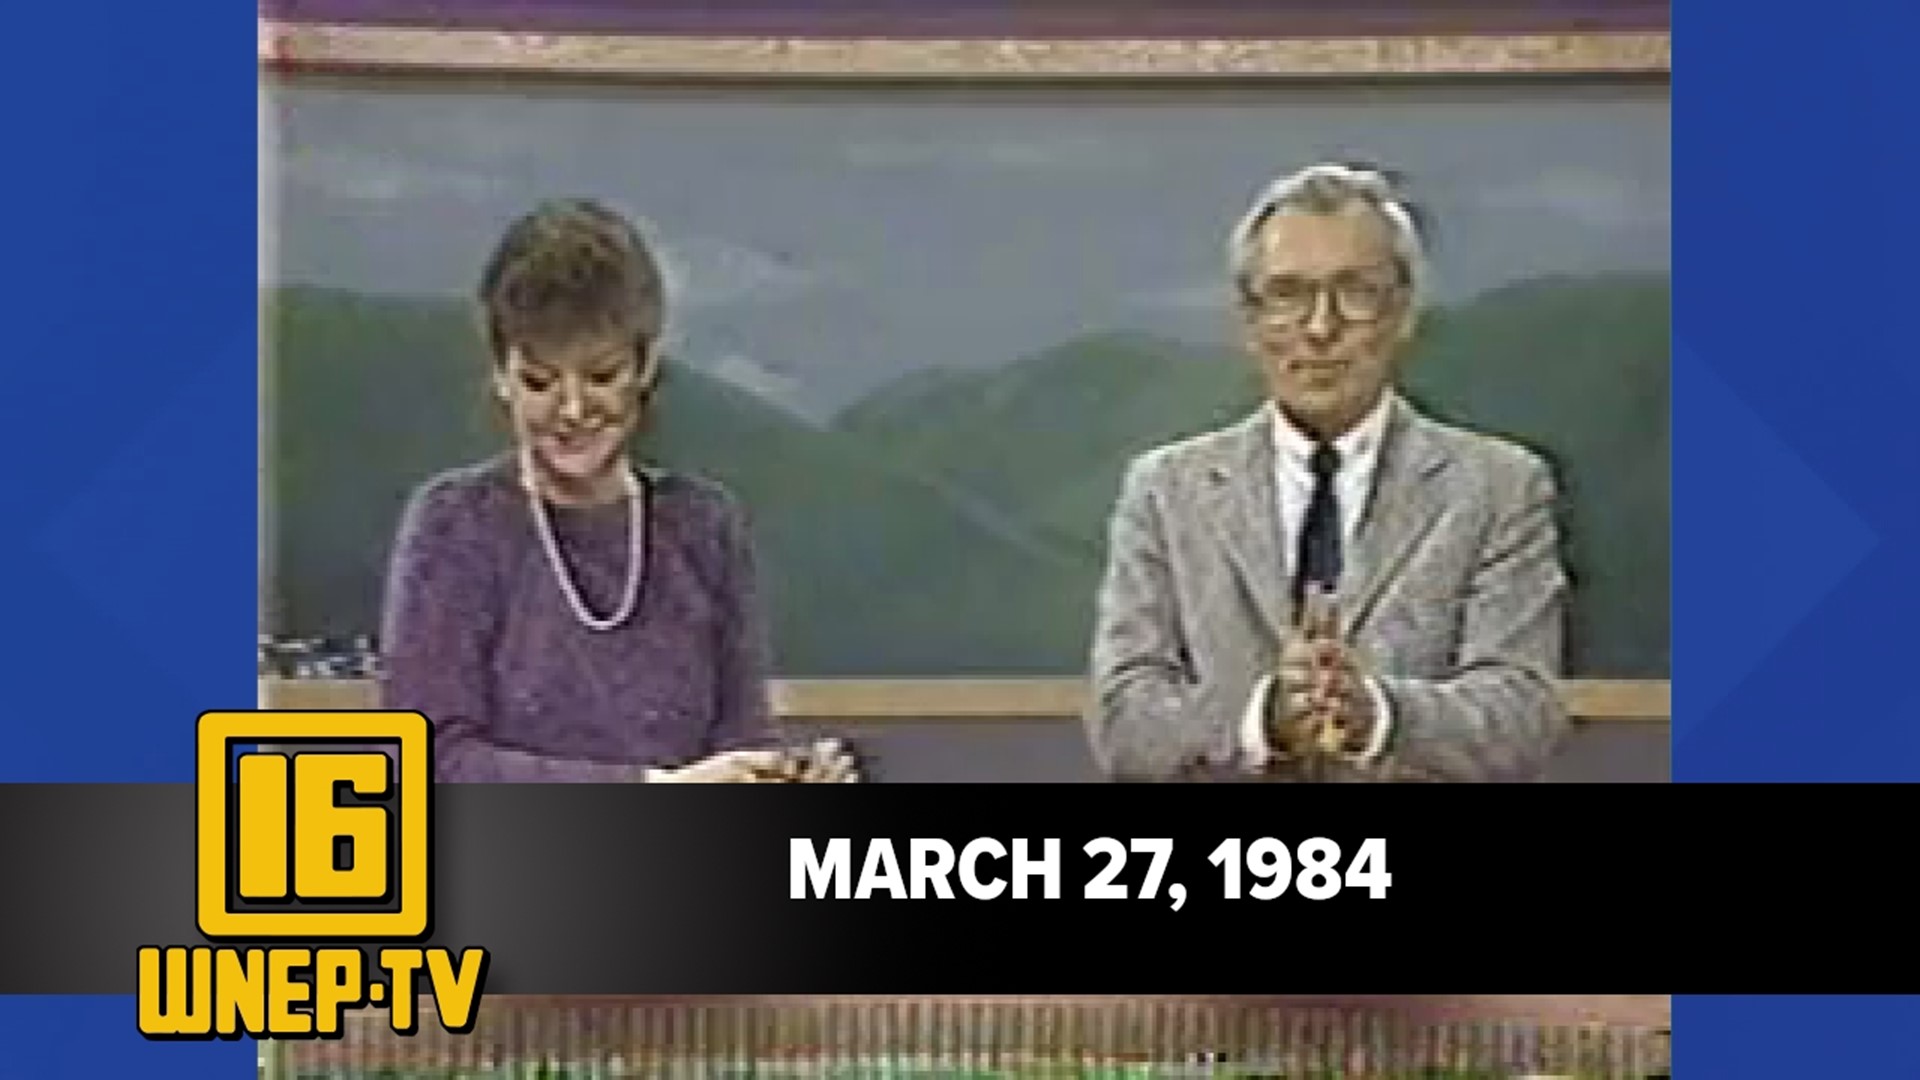 Join Karen Harch and Nolan Johannes with curated stories from March 27, 1984.